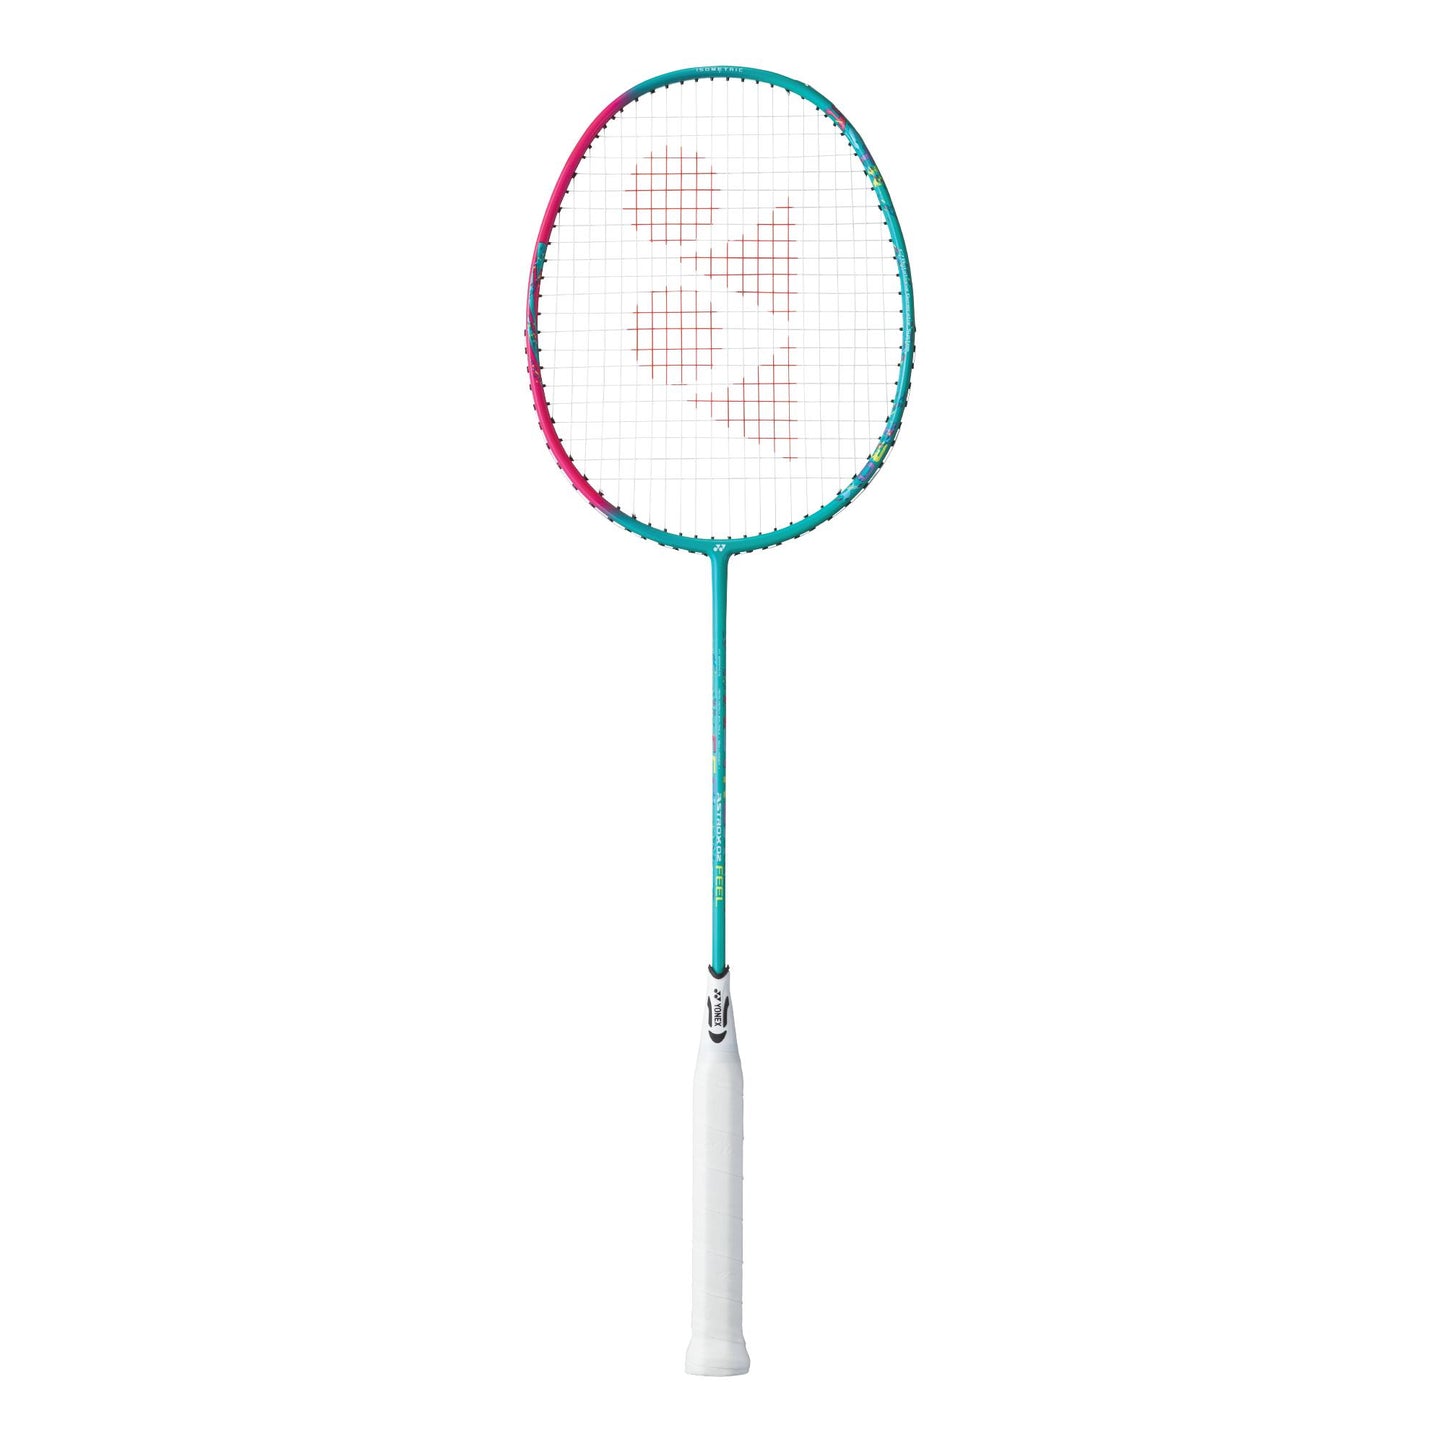 Yonex Astrox 02 Feel Turquoise Badminton Racket  which is available for sale at GSM Sports